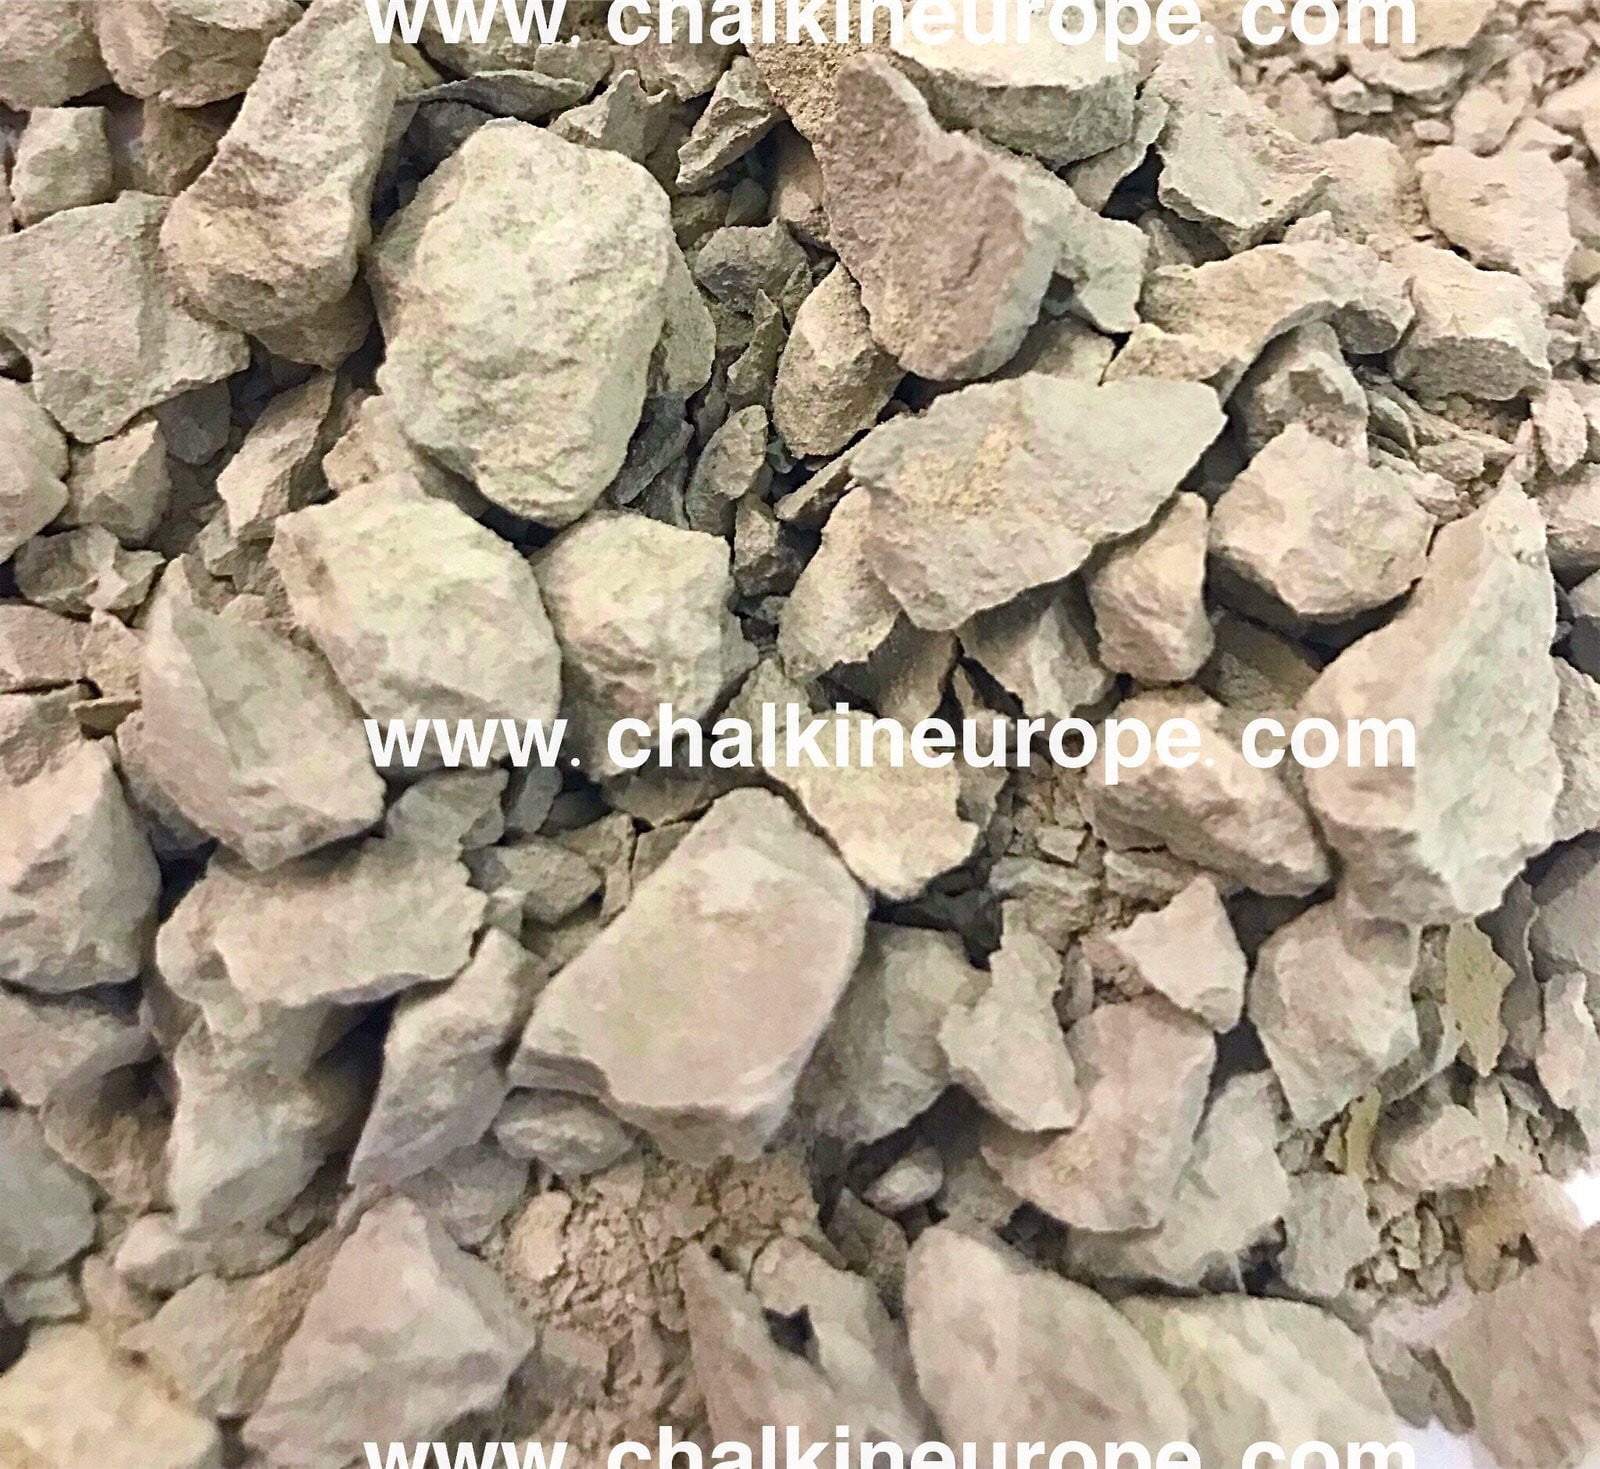 Silver Dust Clay Bites – Chalkineurope